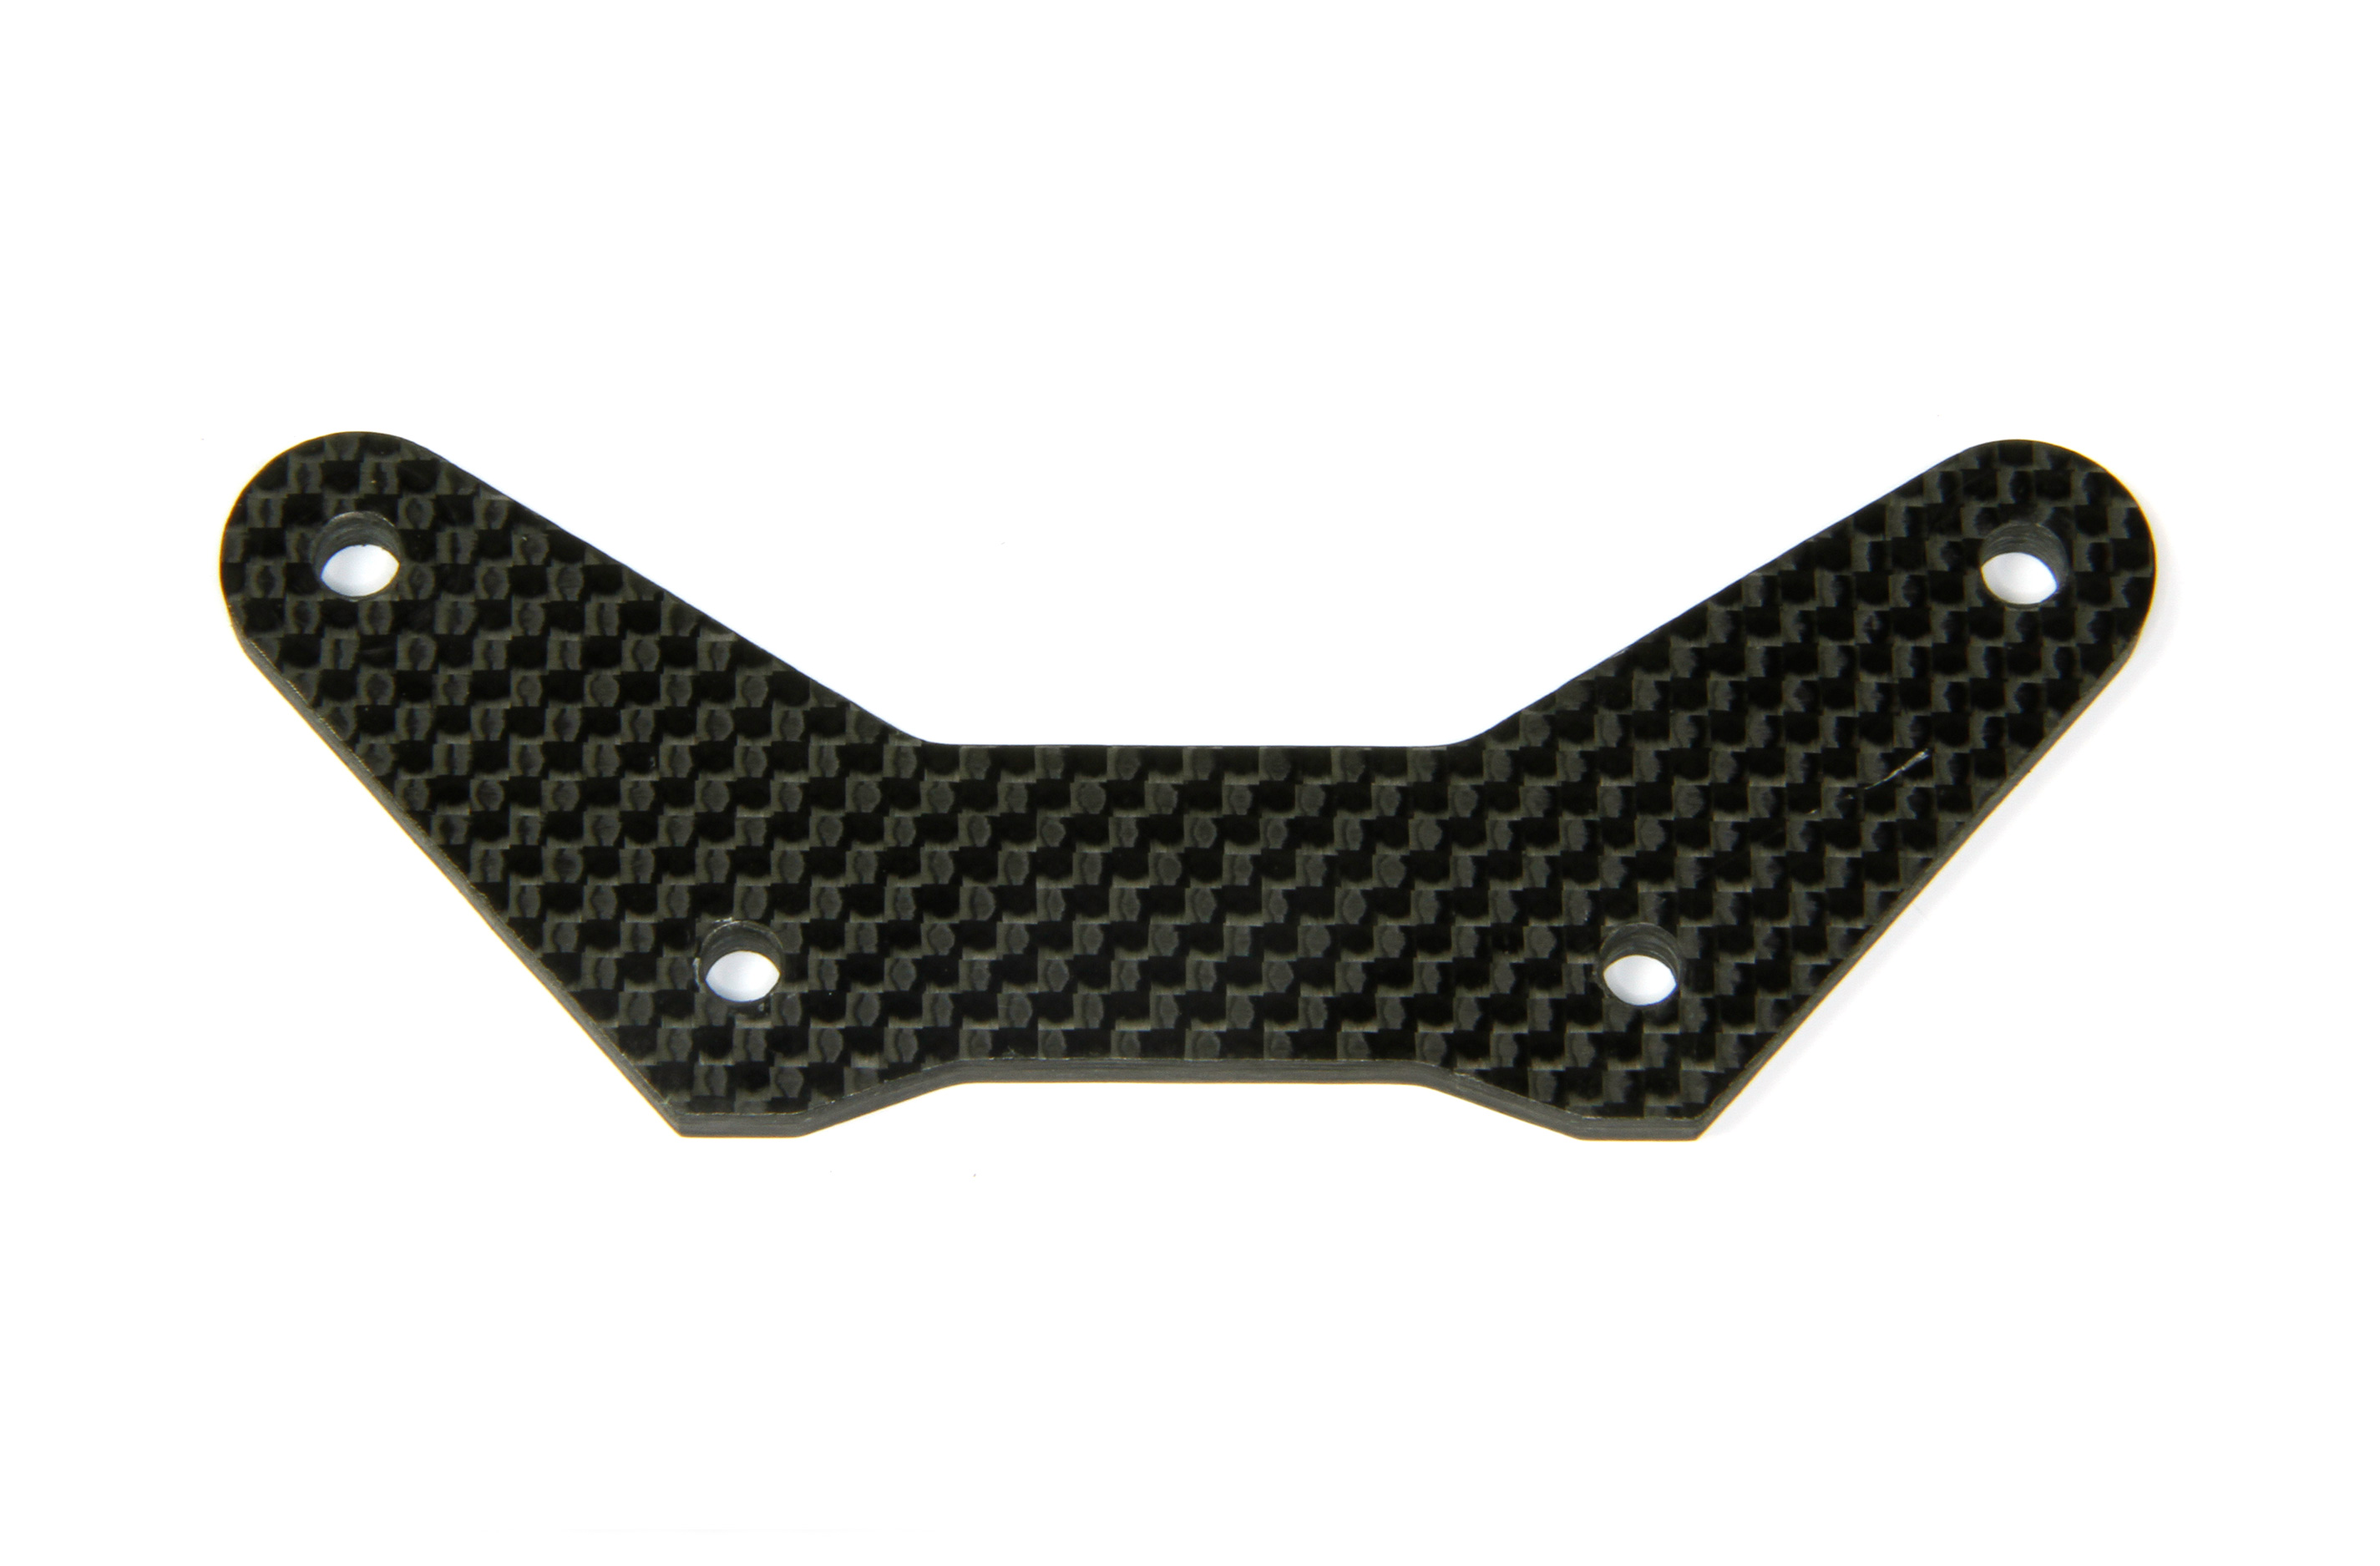 2012-147 Mecatech Carbon Rear Body Support